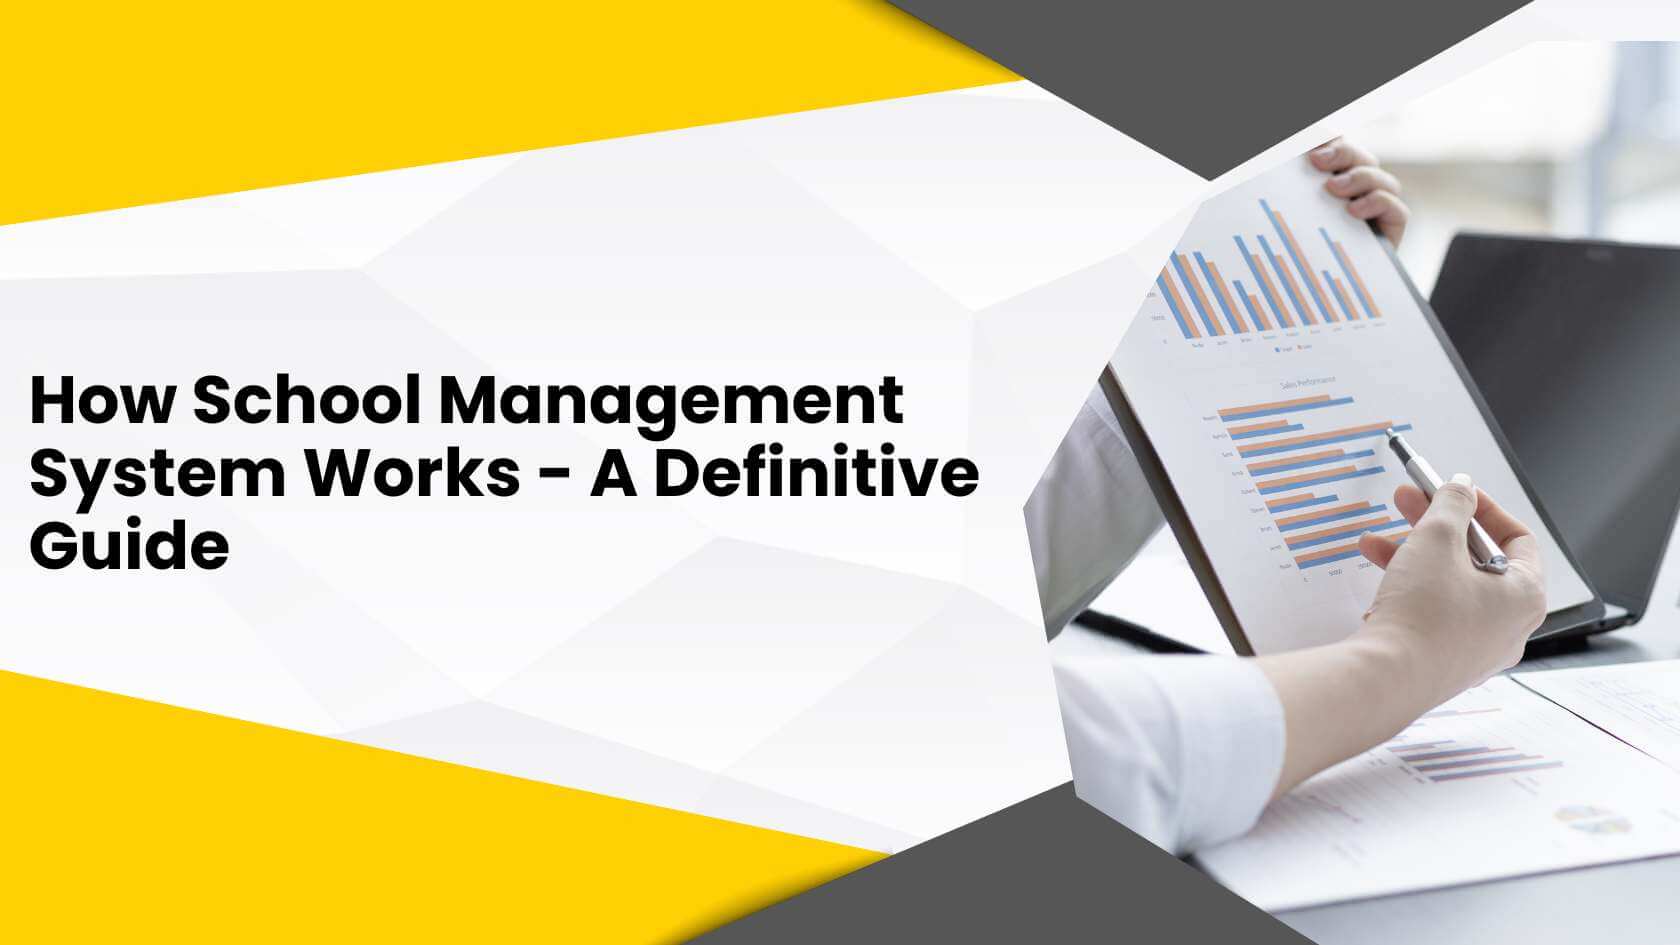 How School Management System Works - A Definitive Guide      